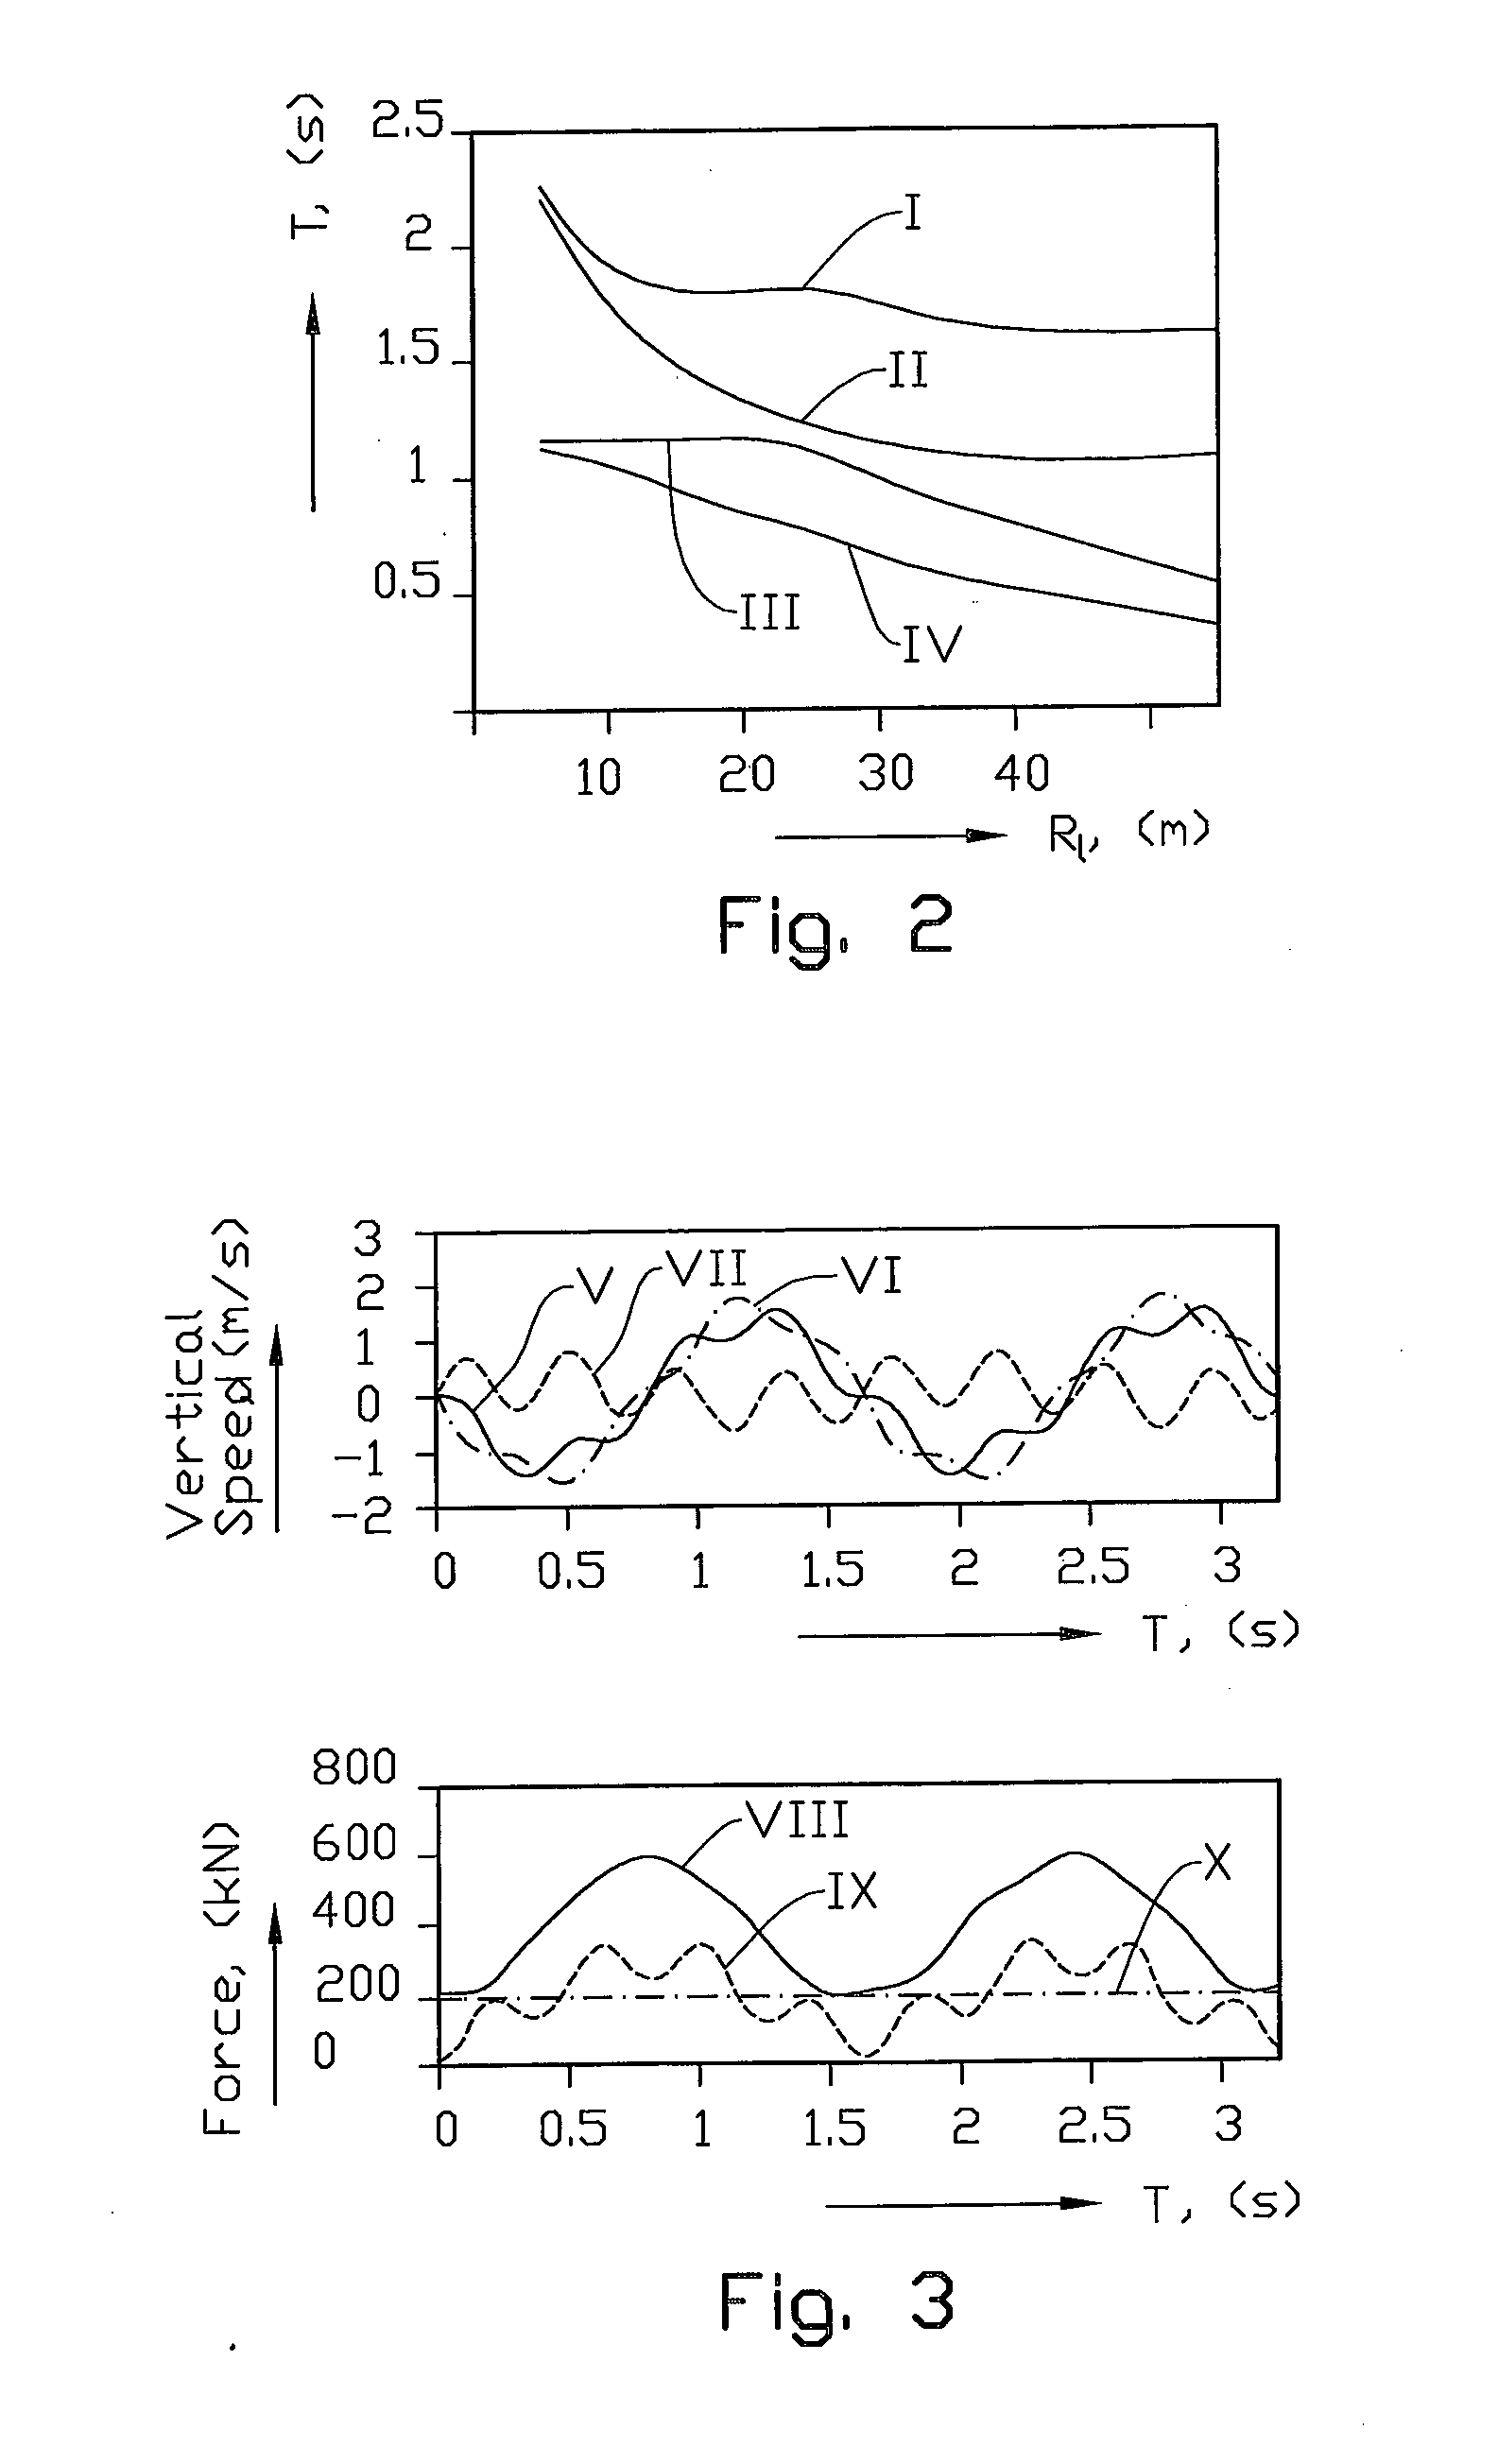 Method for Reducing Dynamic Loads of Cranes